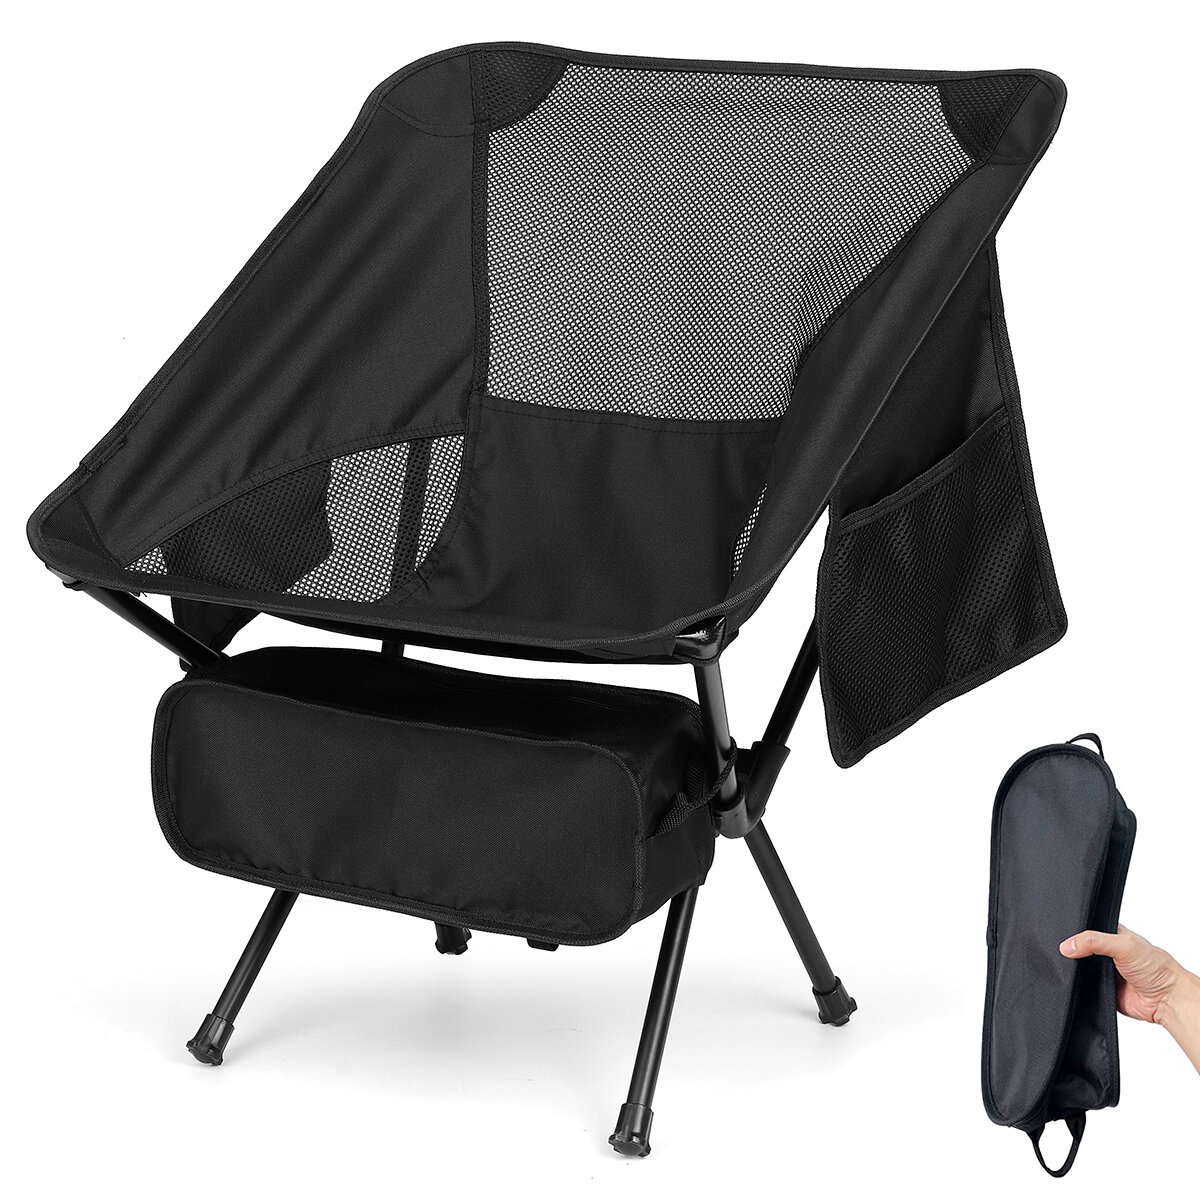 Outdoor Camping Chair Portable Folding Chair Beach Hiking Picnic Seat Fishing Tools Chair with 2 Storage Bags